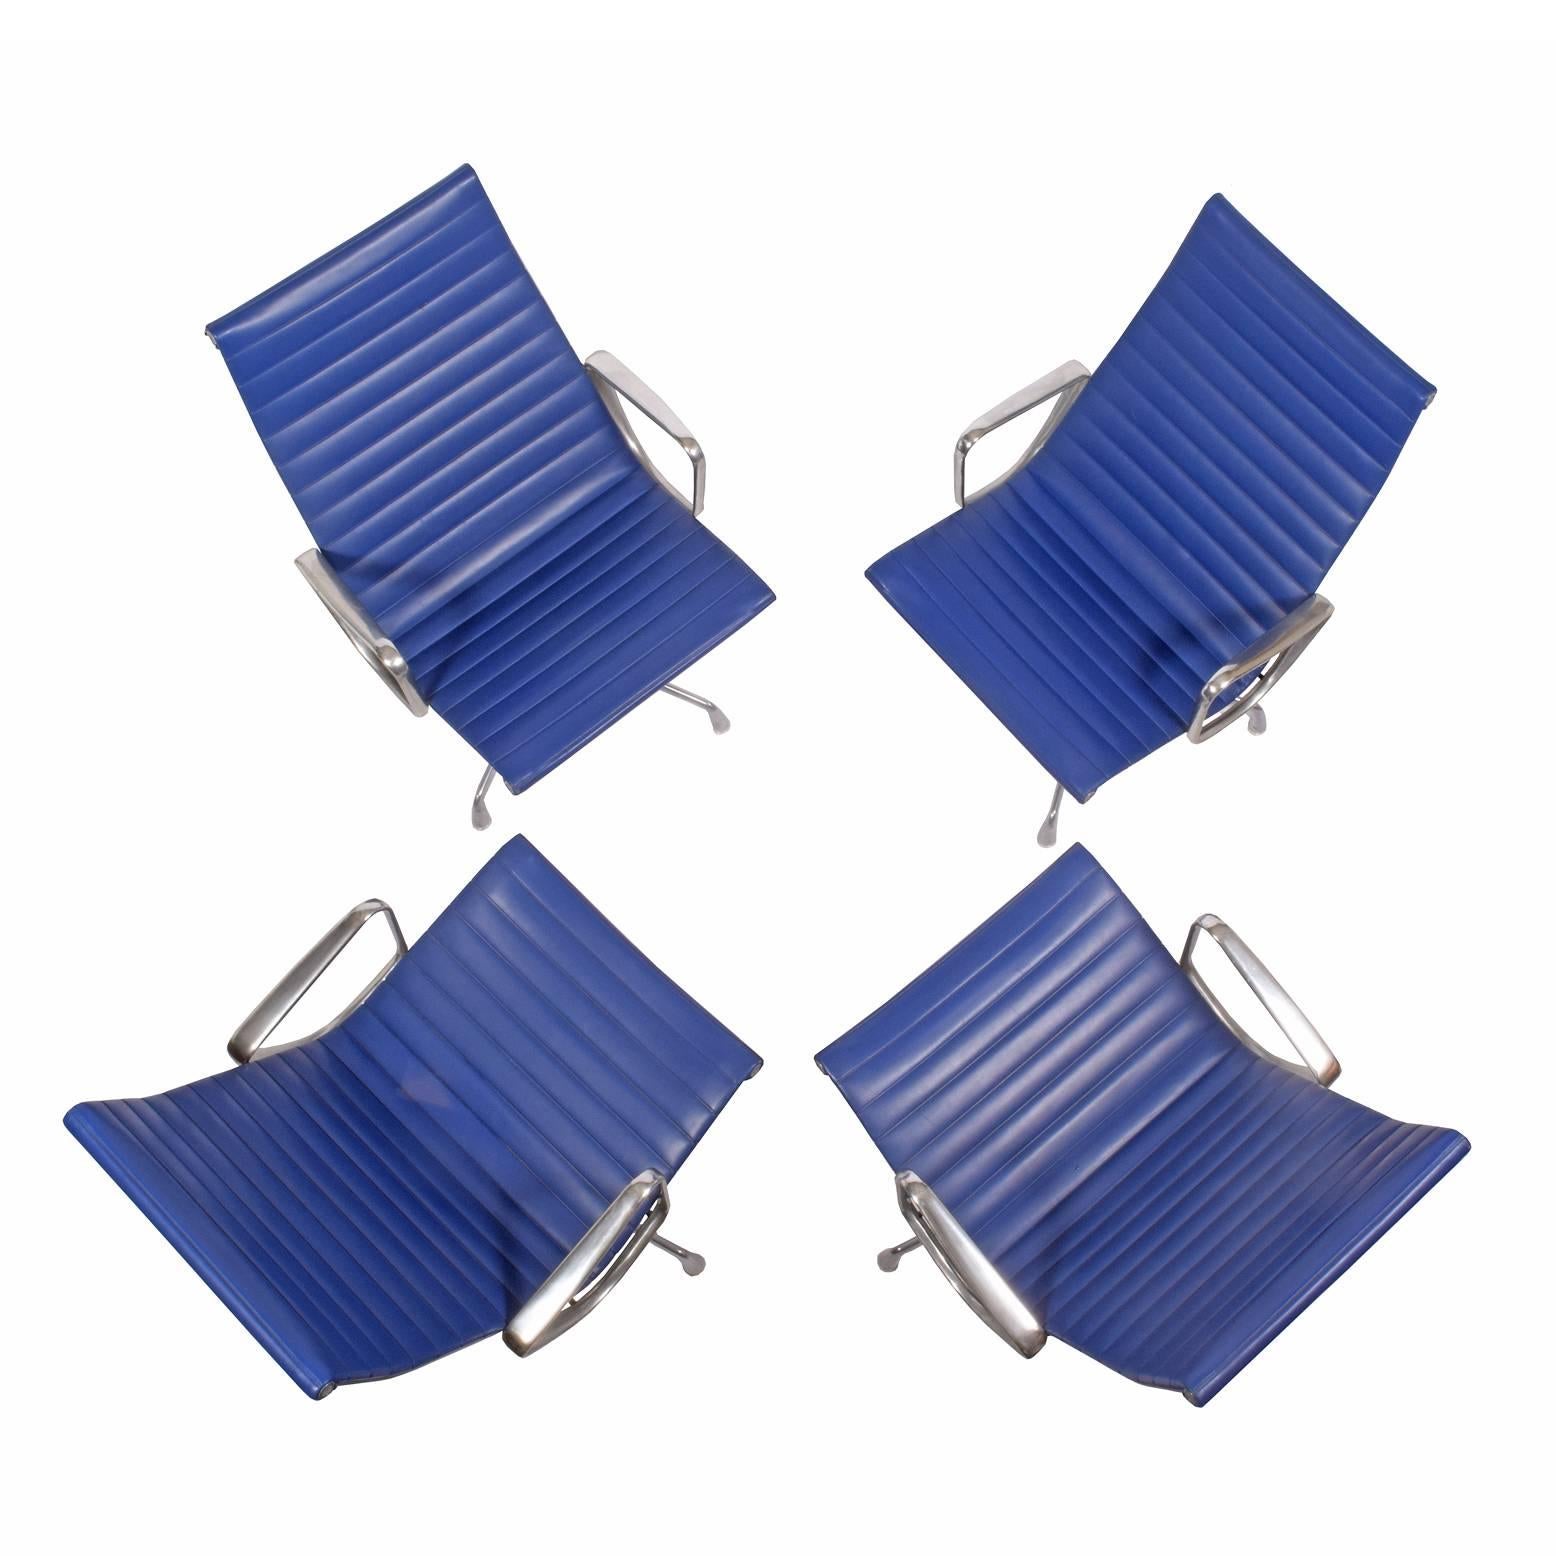 Modern Only two Aluminium Group Chairs by Charles Eames for Herman Miller